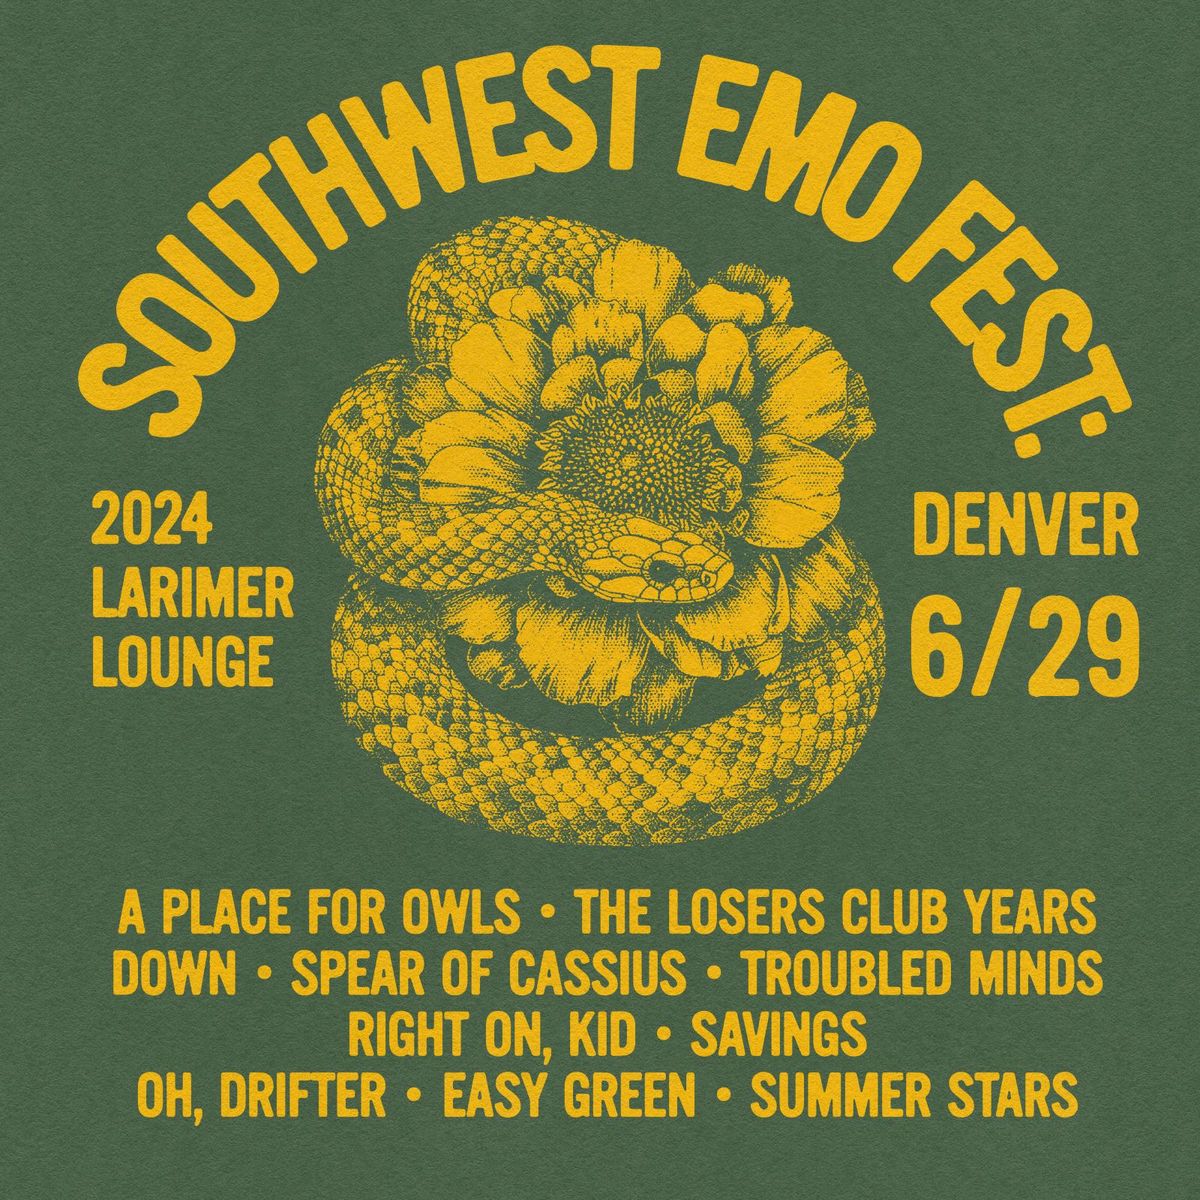 Southwest Emo Fest Feat. A Place For Owls, The Losers Club, Years Down, Troubled Minds + more